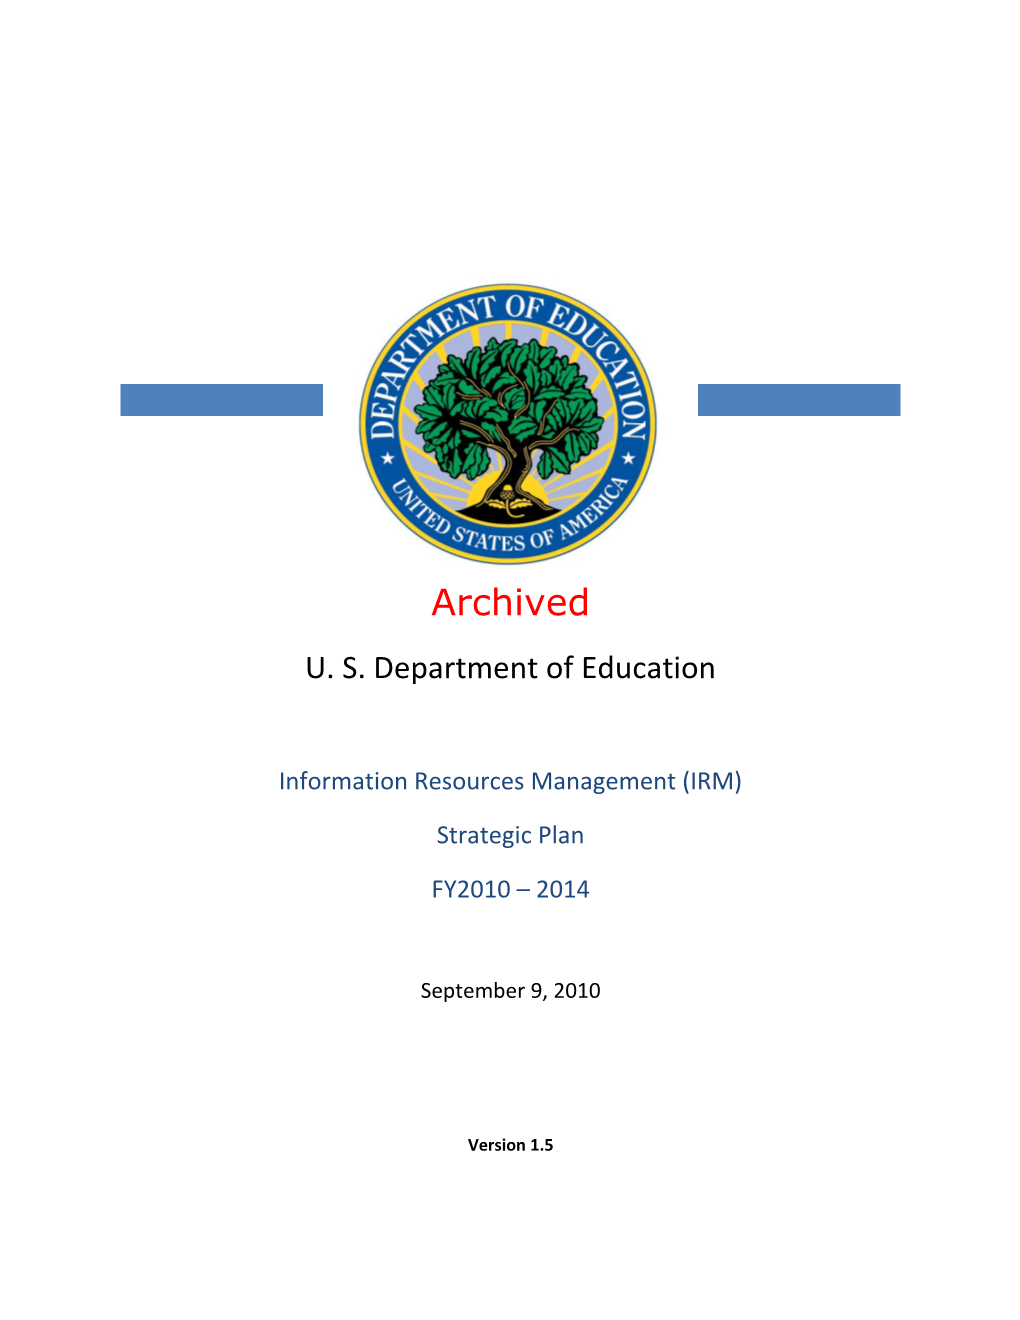 Archived IRM Strategic Plan FY2010-2014